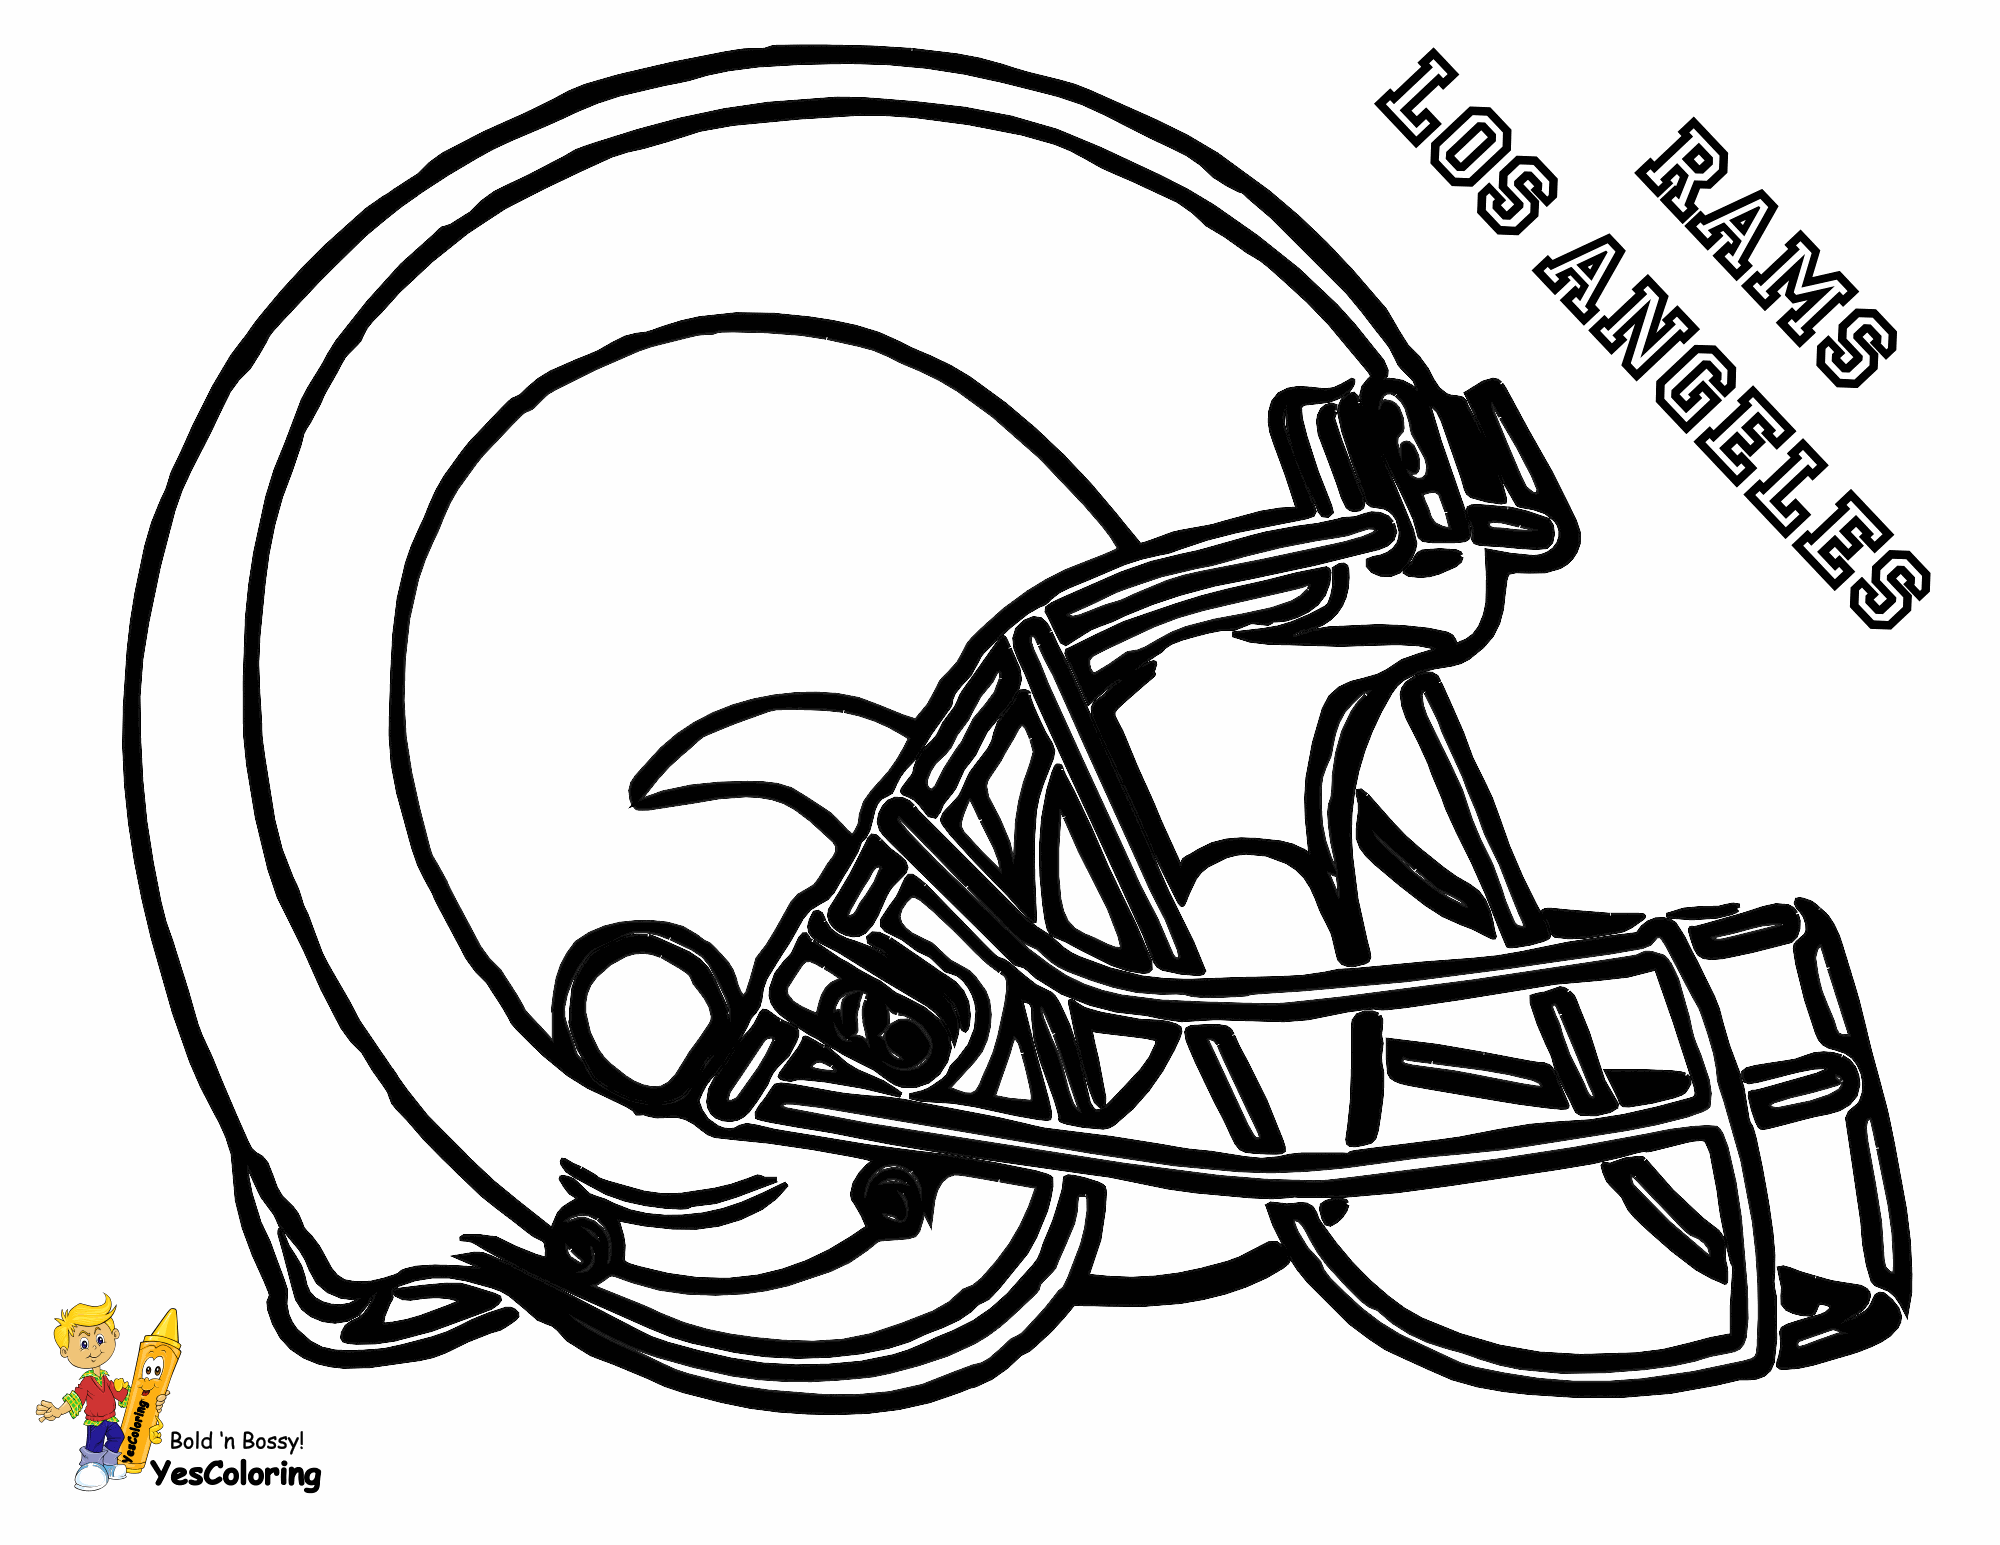 Pro Football Helmet Coloring Page | NFL Football | Free Coloring